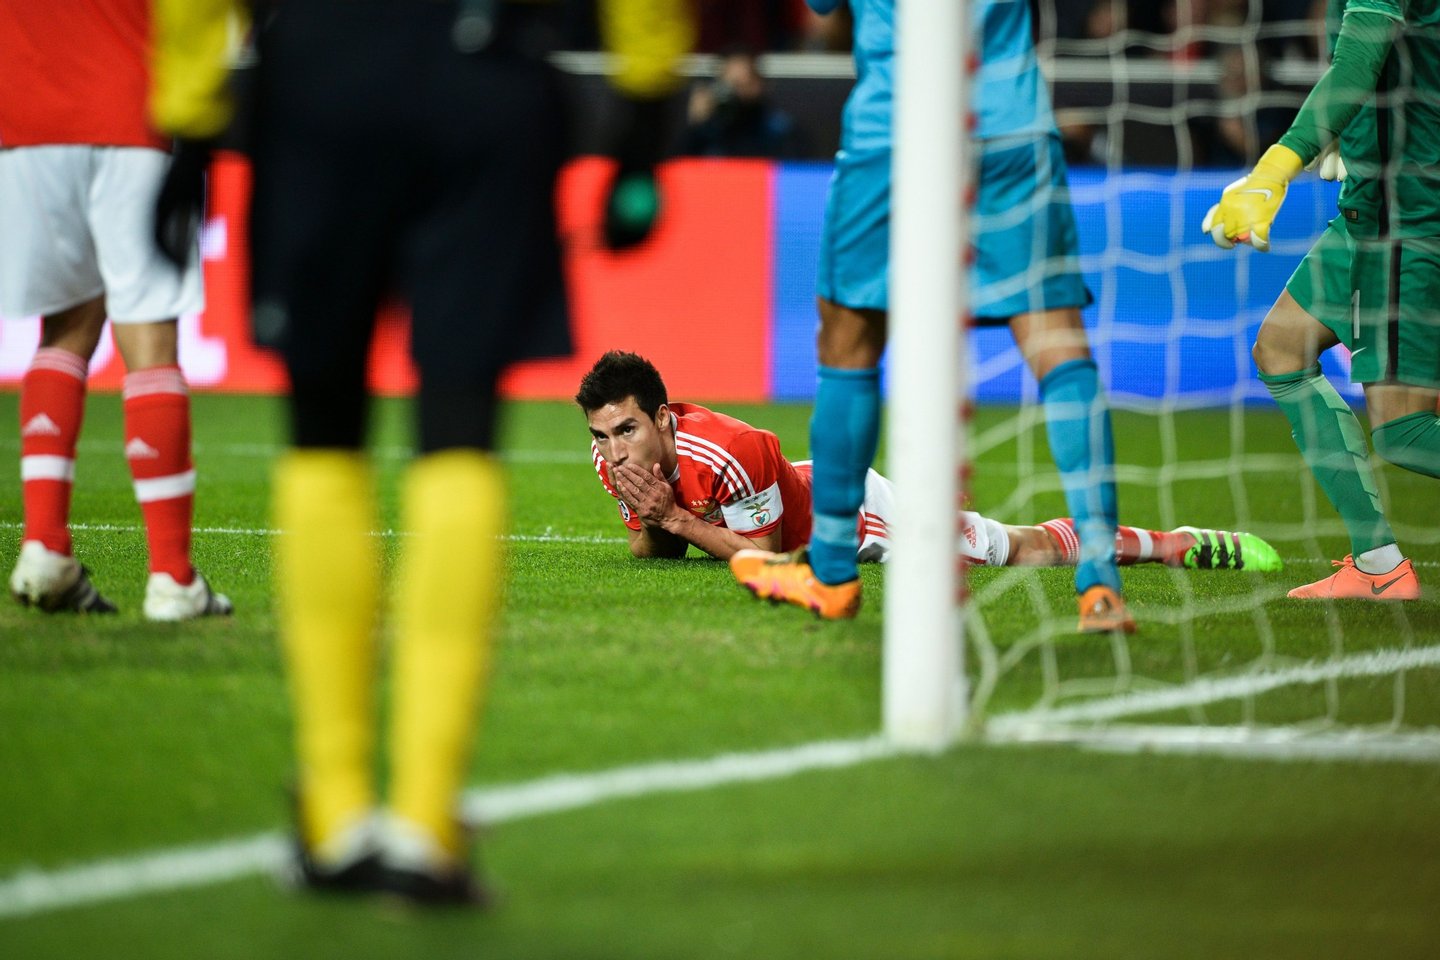 Benfica's Argentine midfielder Nicolas Gaitan lies on the field after a failed attempt on goal during the UEFA Champions League round of 16 football match SL Benfica vs FC Zenith Saint-Petersburg at the Luz stadium in Lisbon on February 16, 2016. / AFP / PATRICIA DE MELO MOREIRA (Photo credit should read PATRICIA DE MELO MOREIRA/AFP/Getty Images)